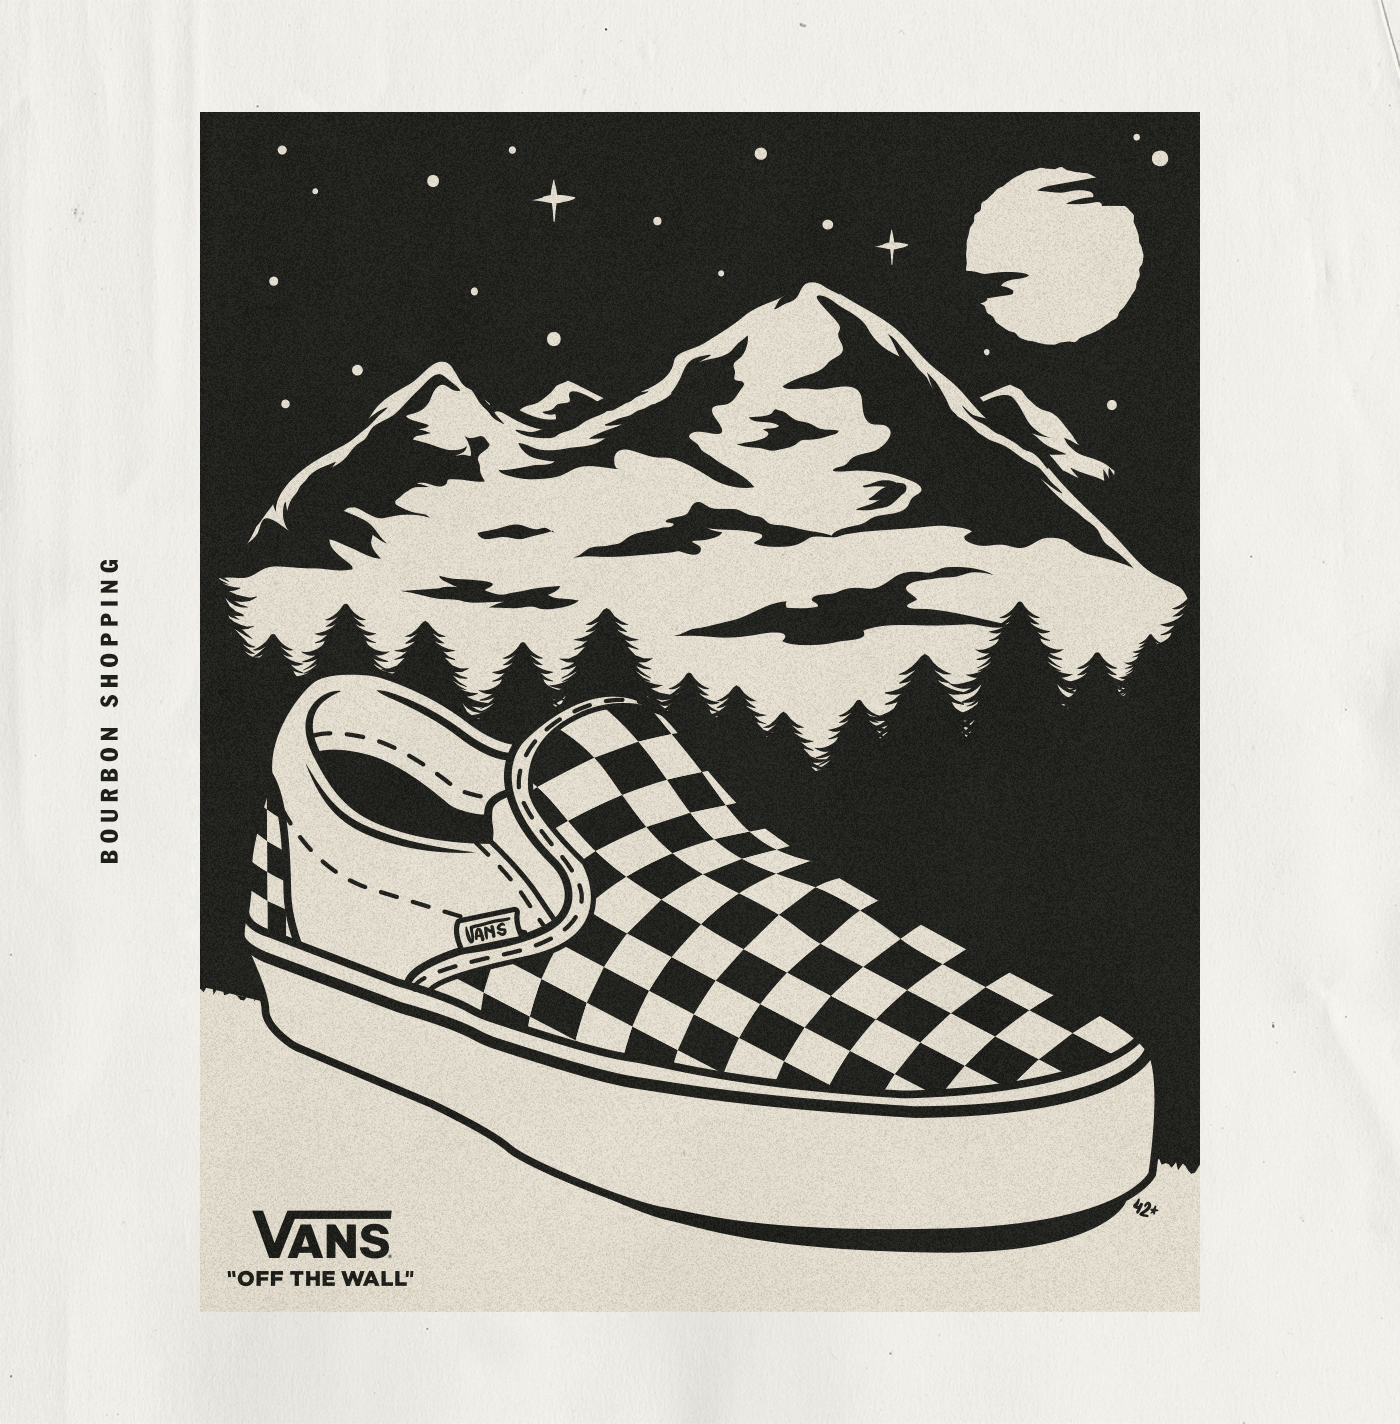 Pin on vans off the wall